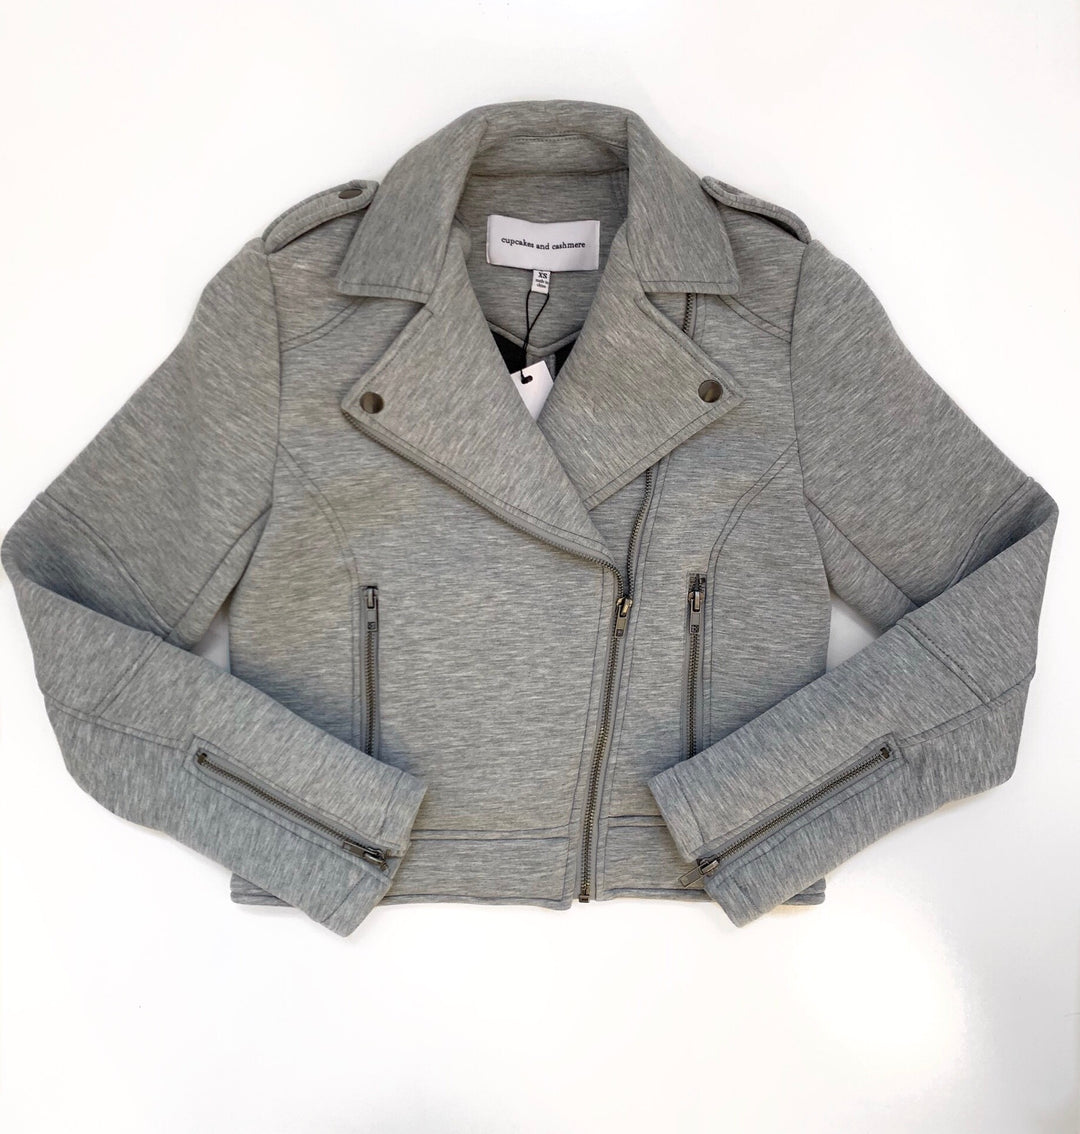 Cupcakes & Cashmere - Katerina Jacket in Light Heather Grey